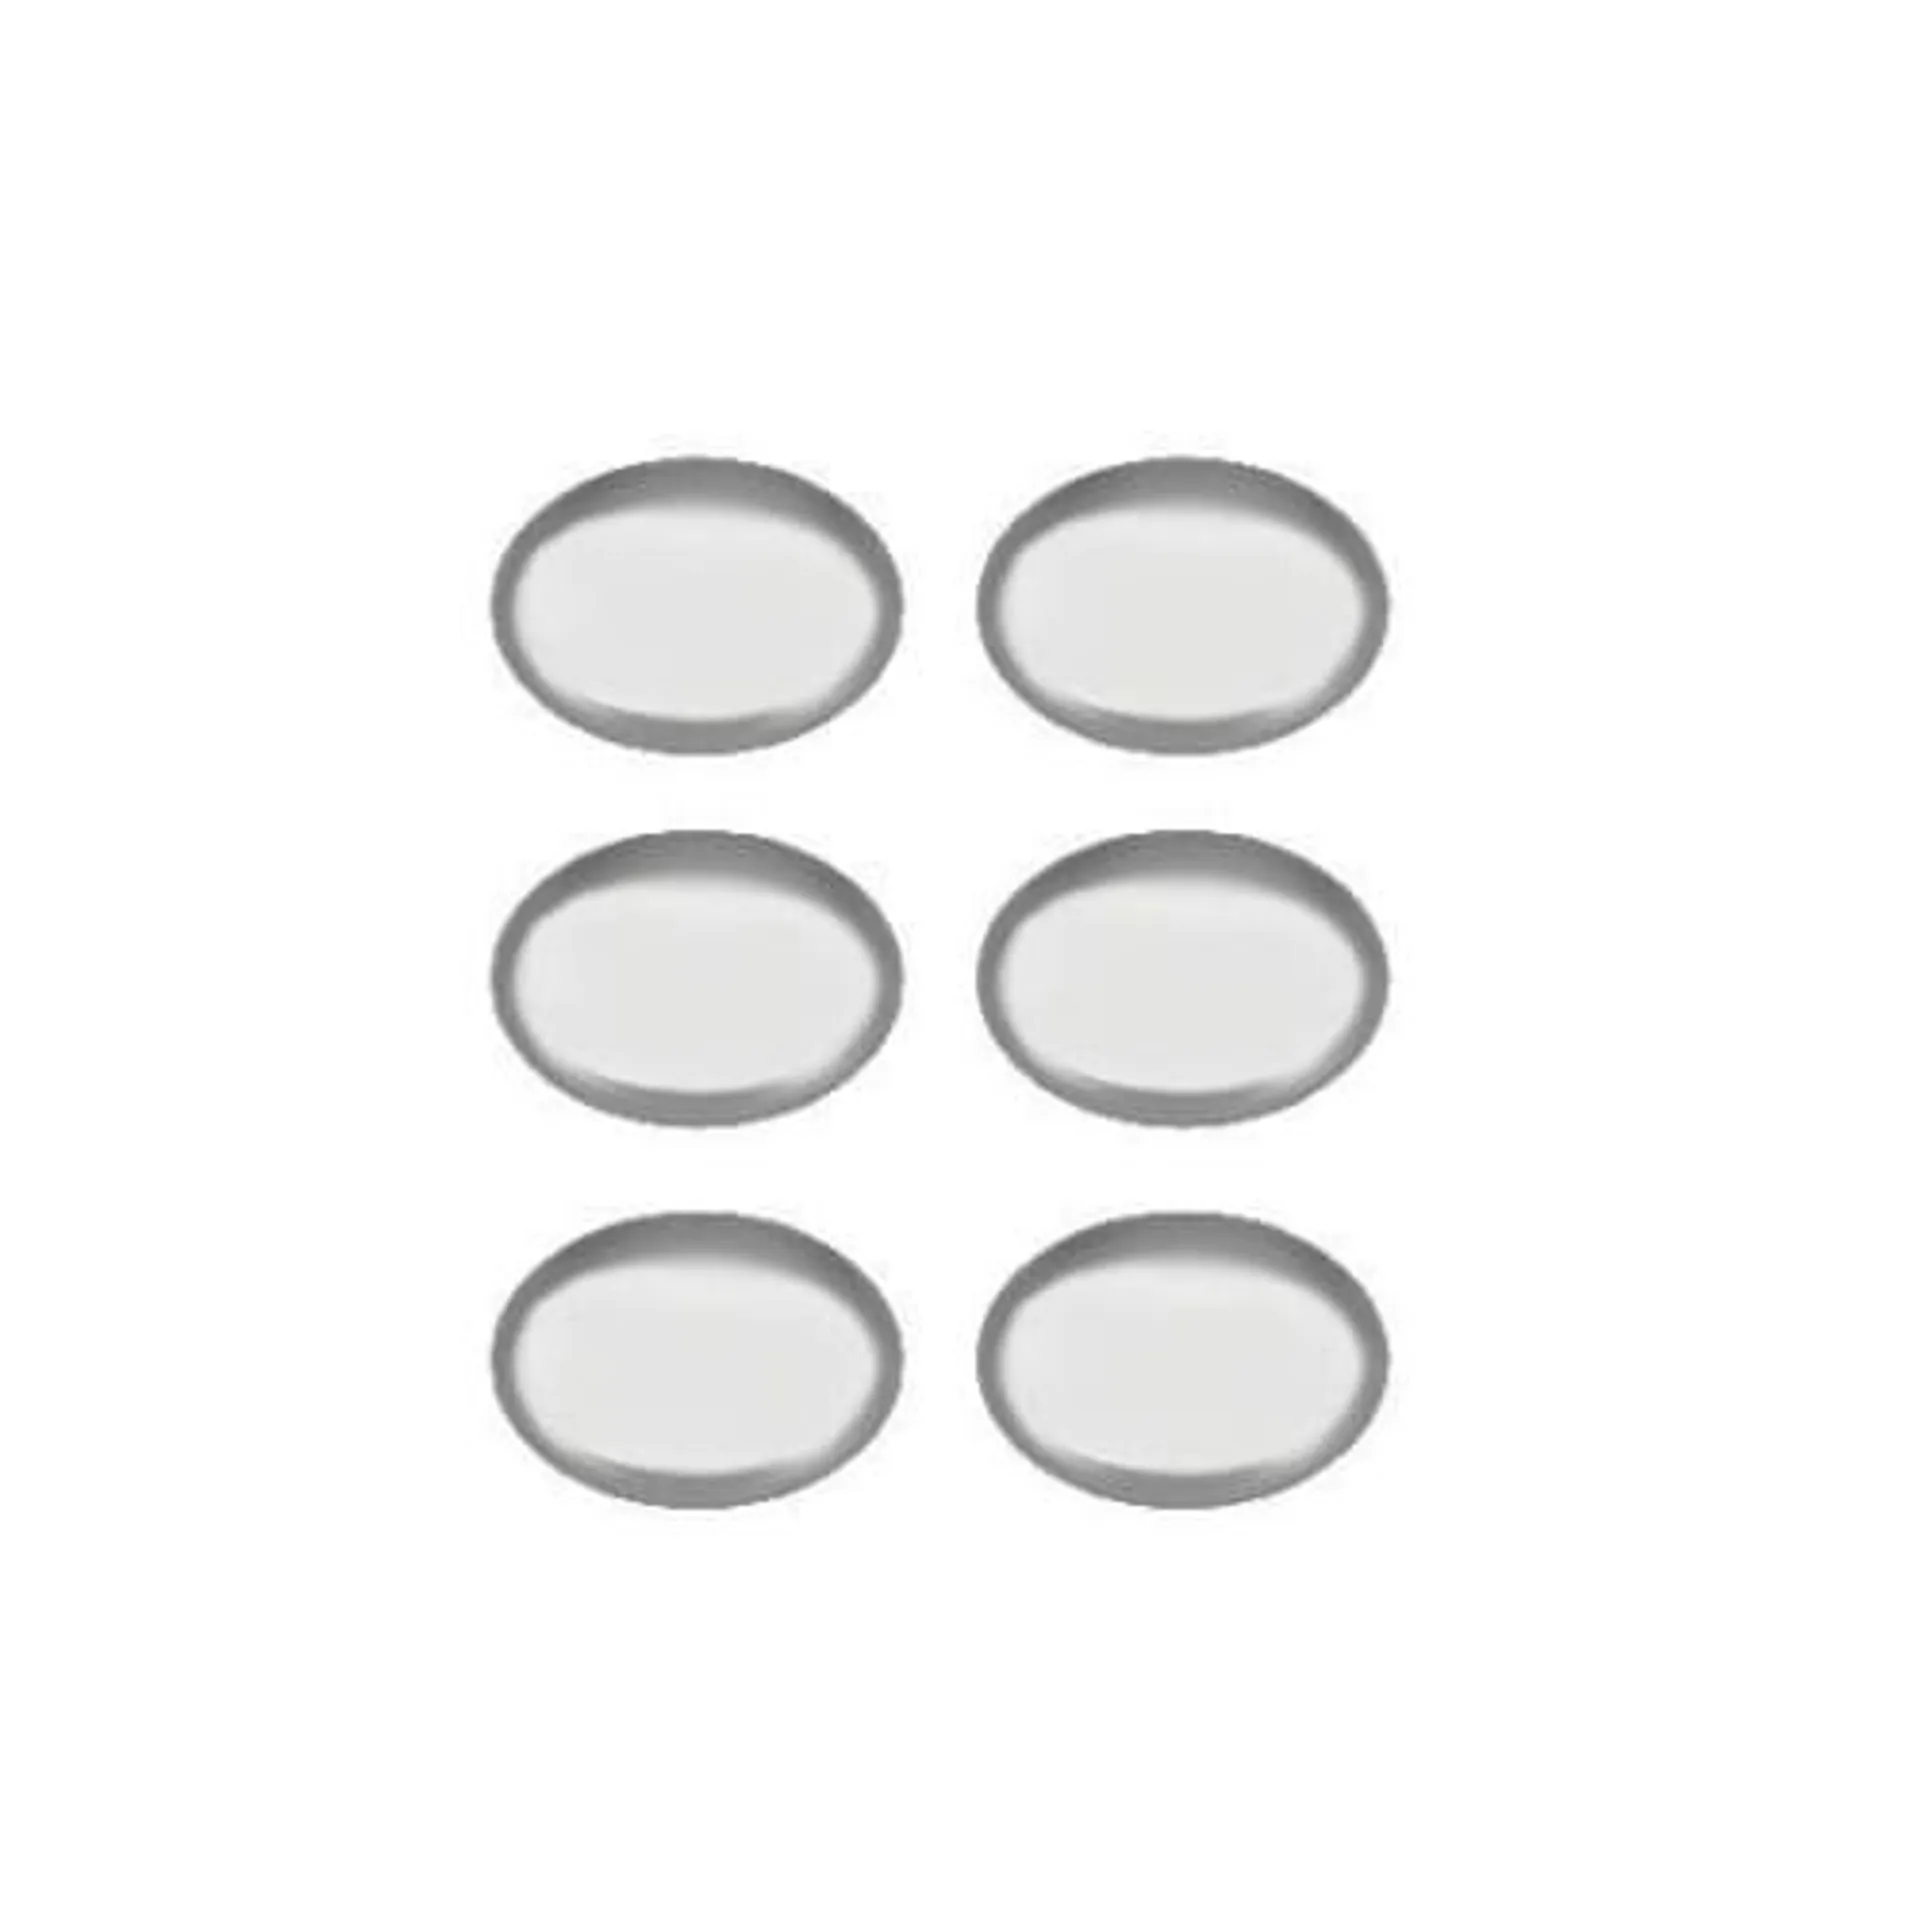 Wickes Oval Door Knob - Polished Chrome 33mm Pack of 6